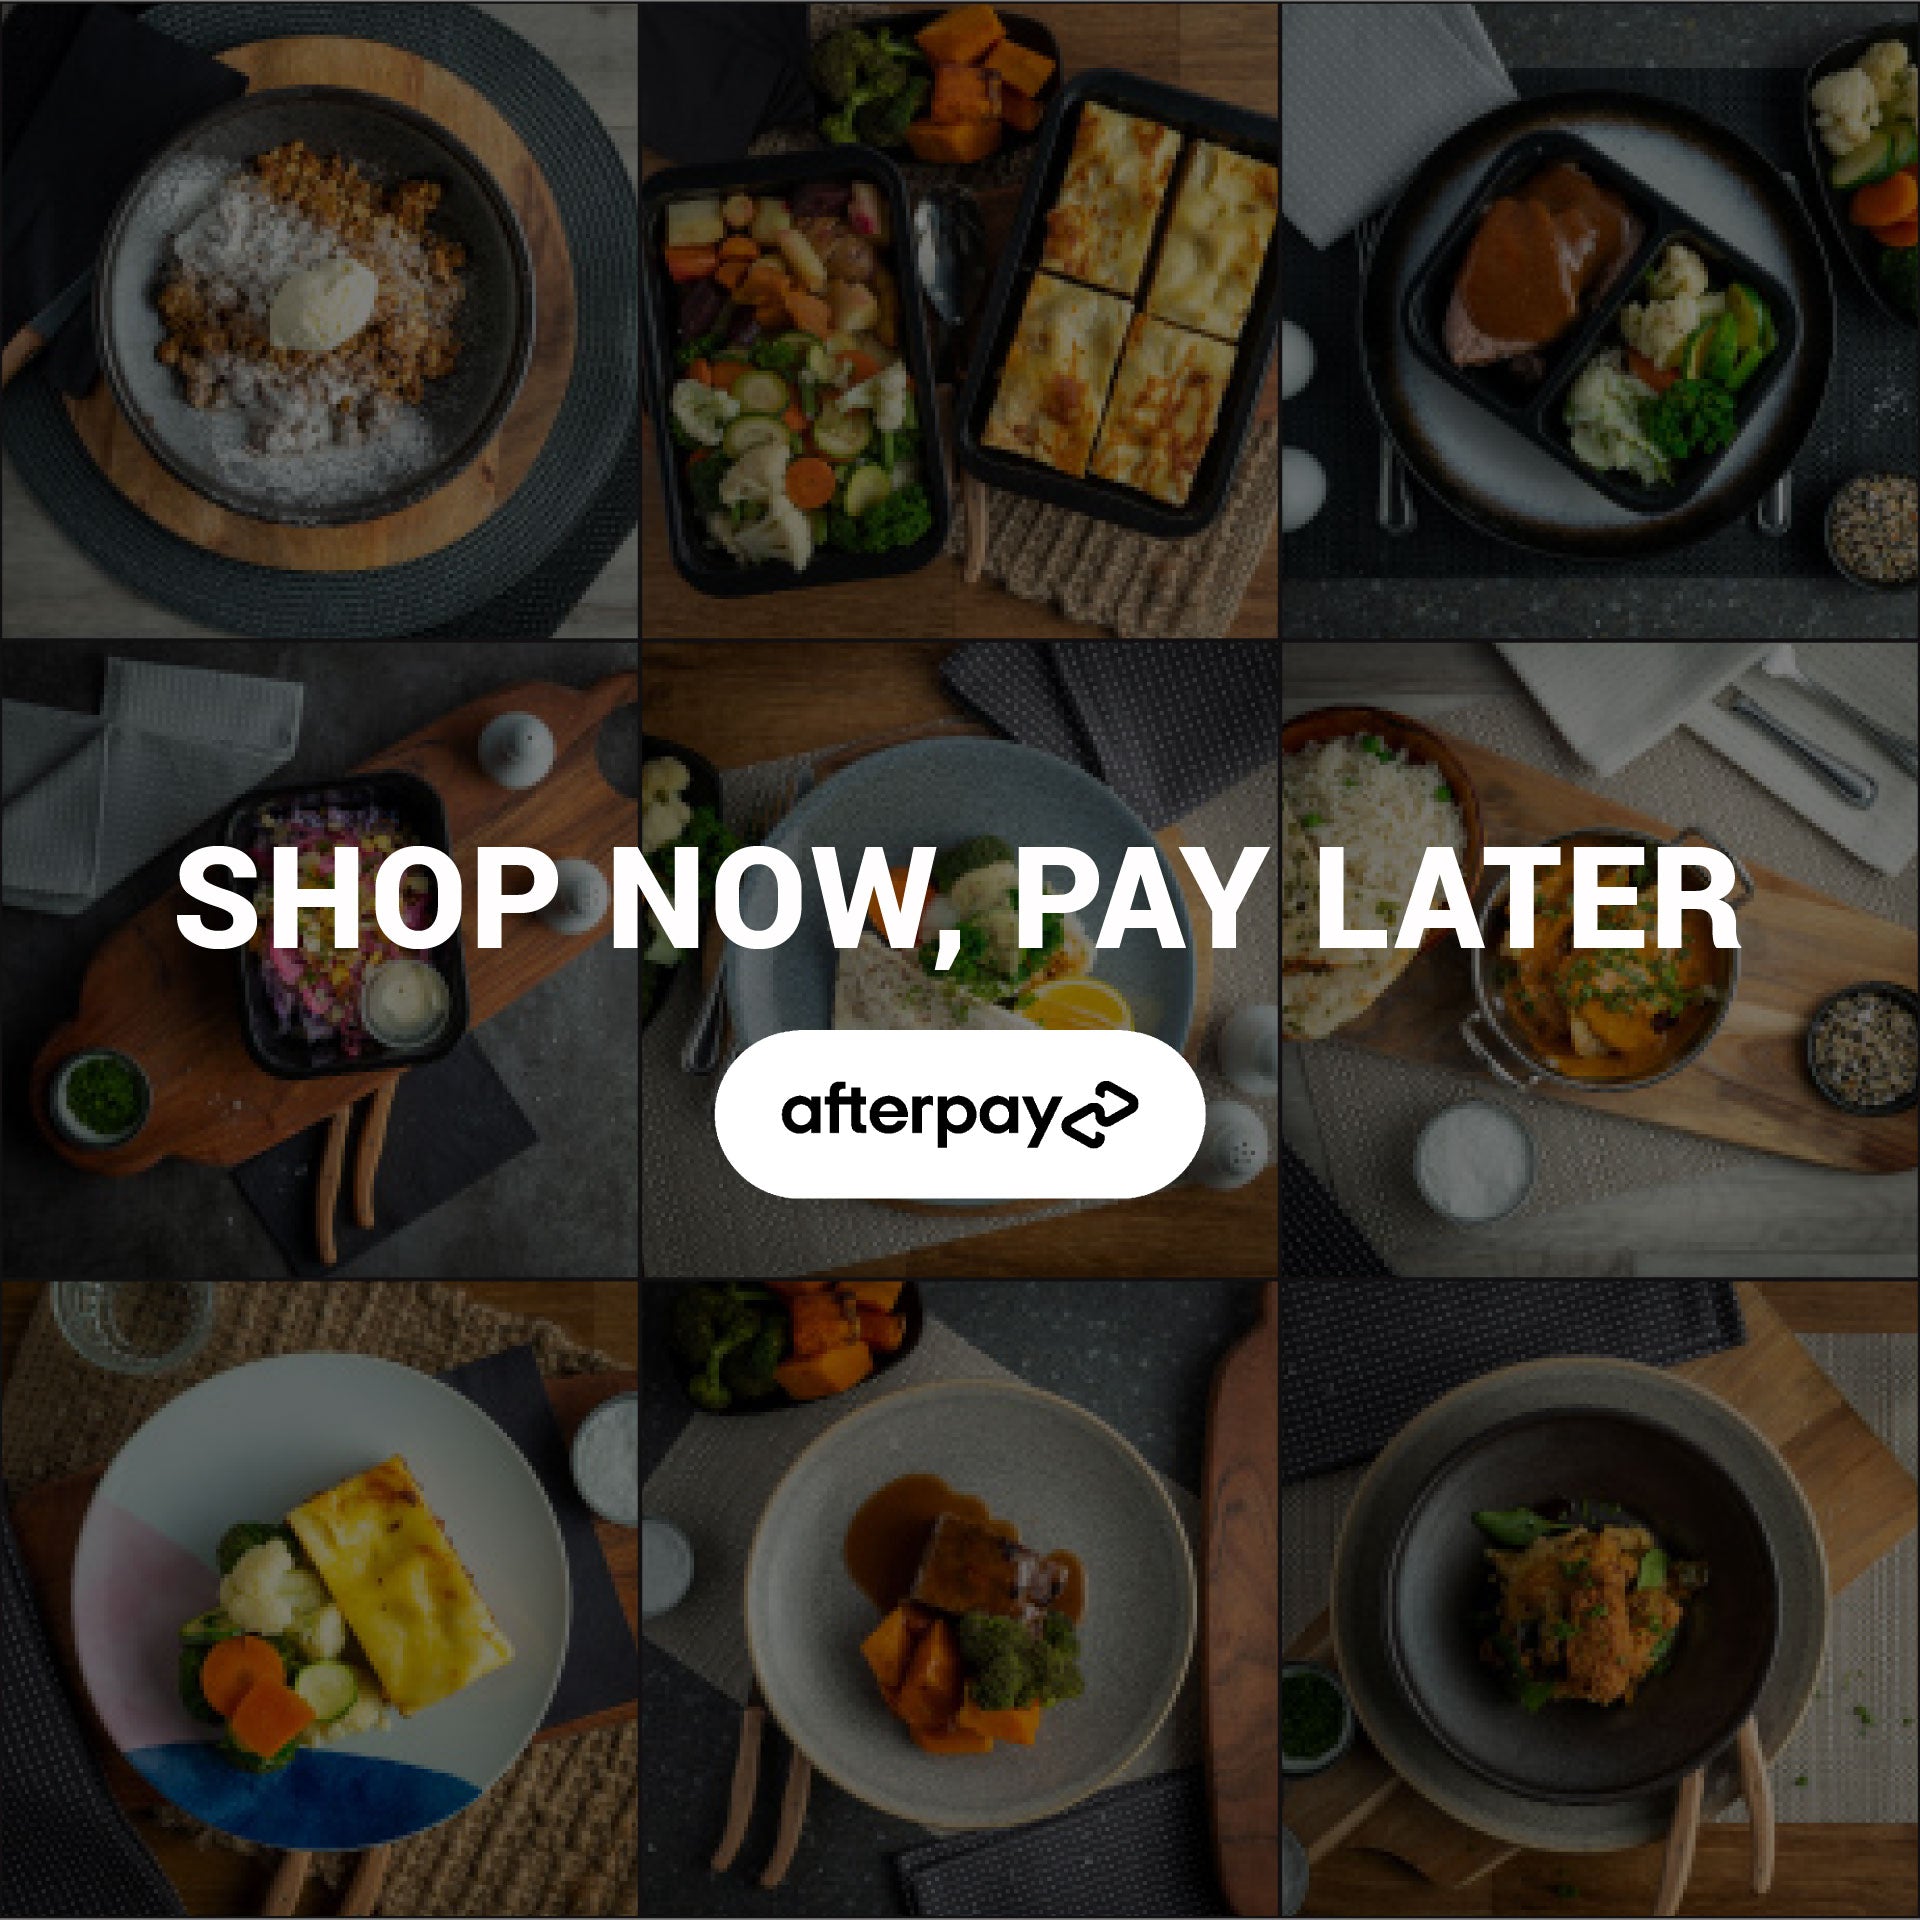 Afterpay is now available for Fitfood meal orders